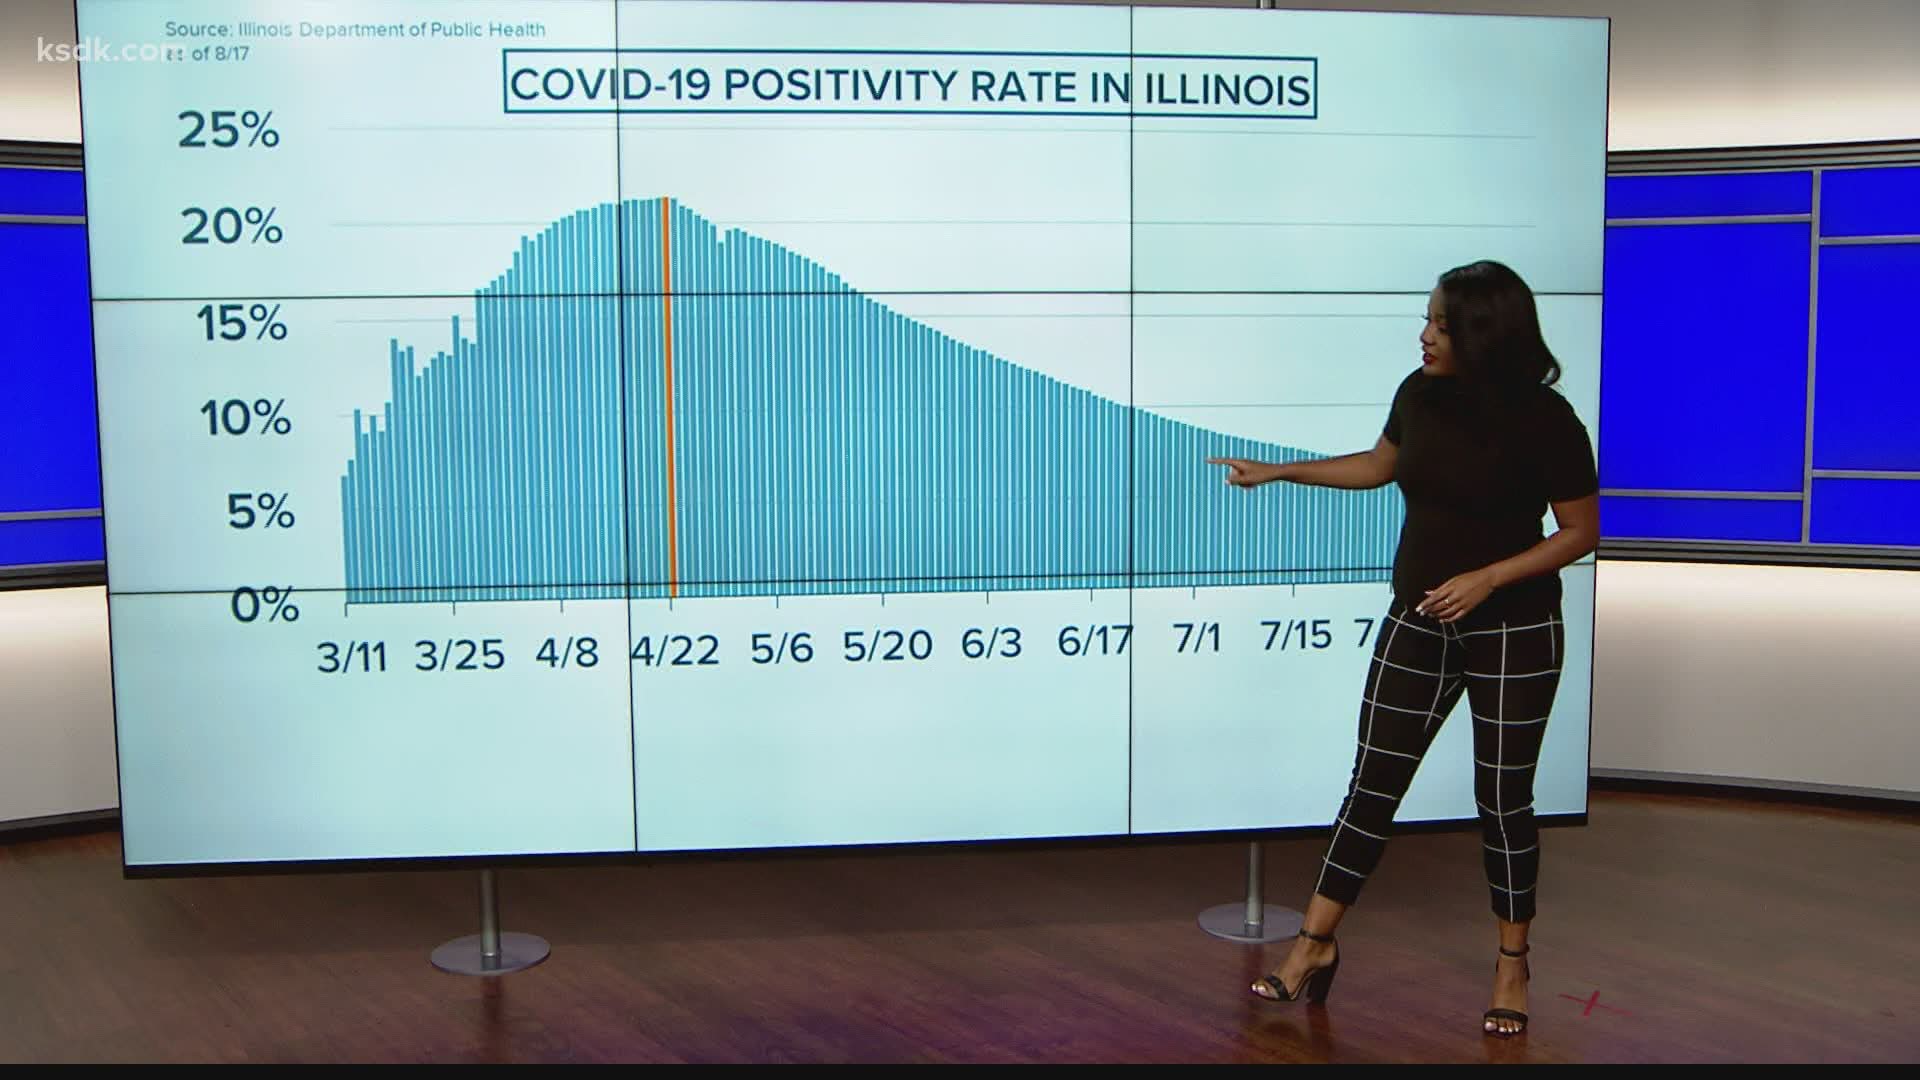 Right now the entire state's positivity rate is around 6%.